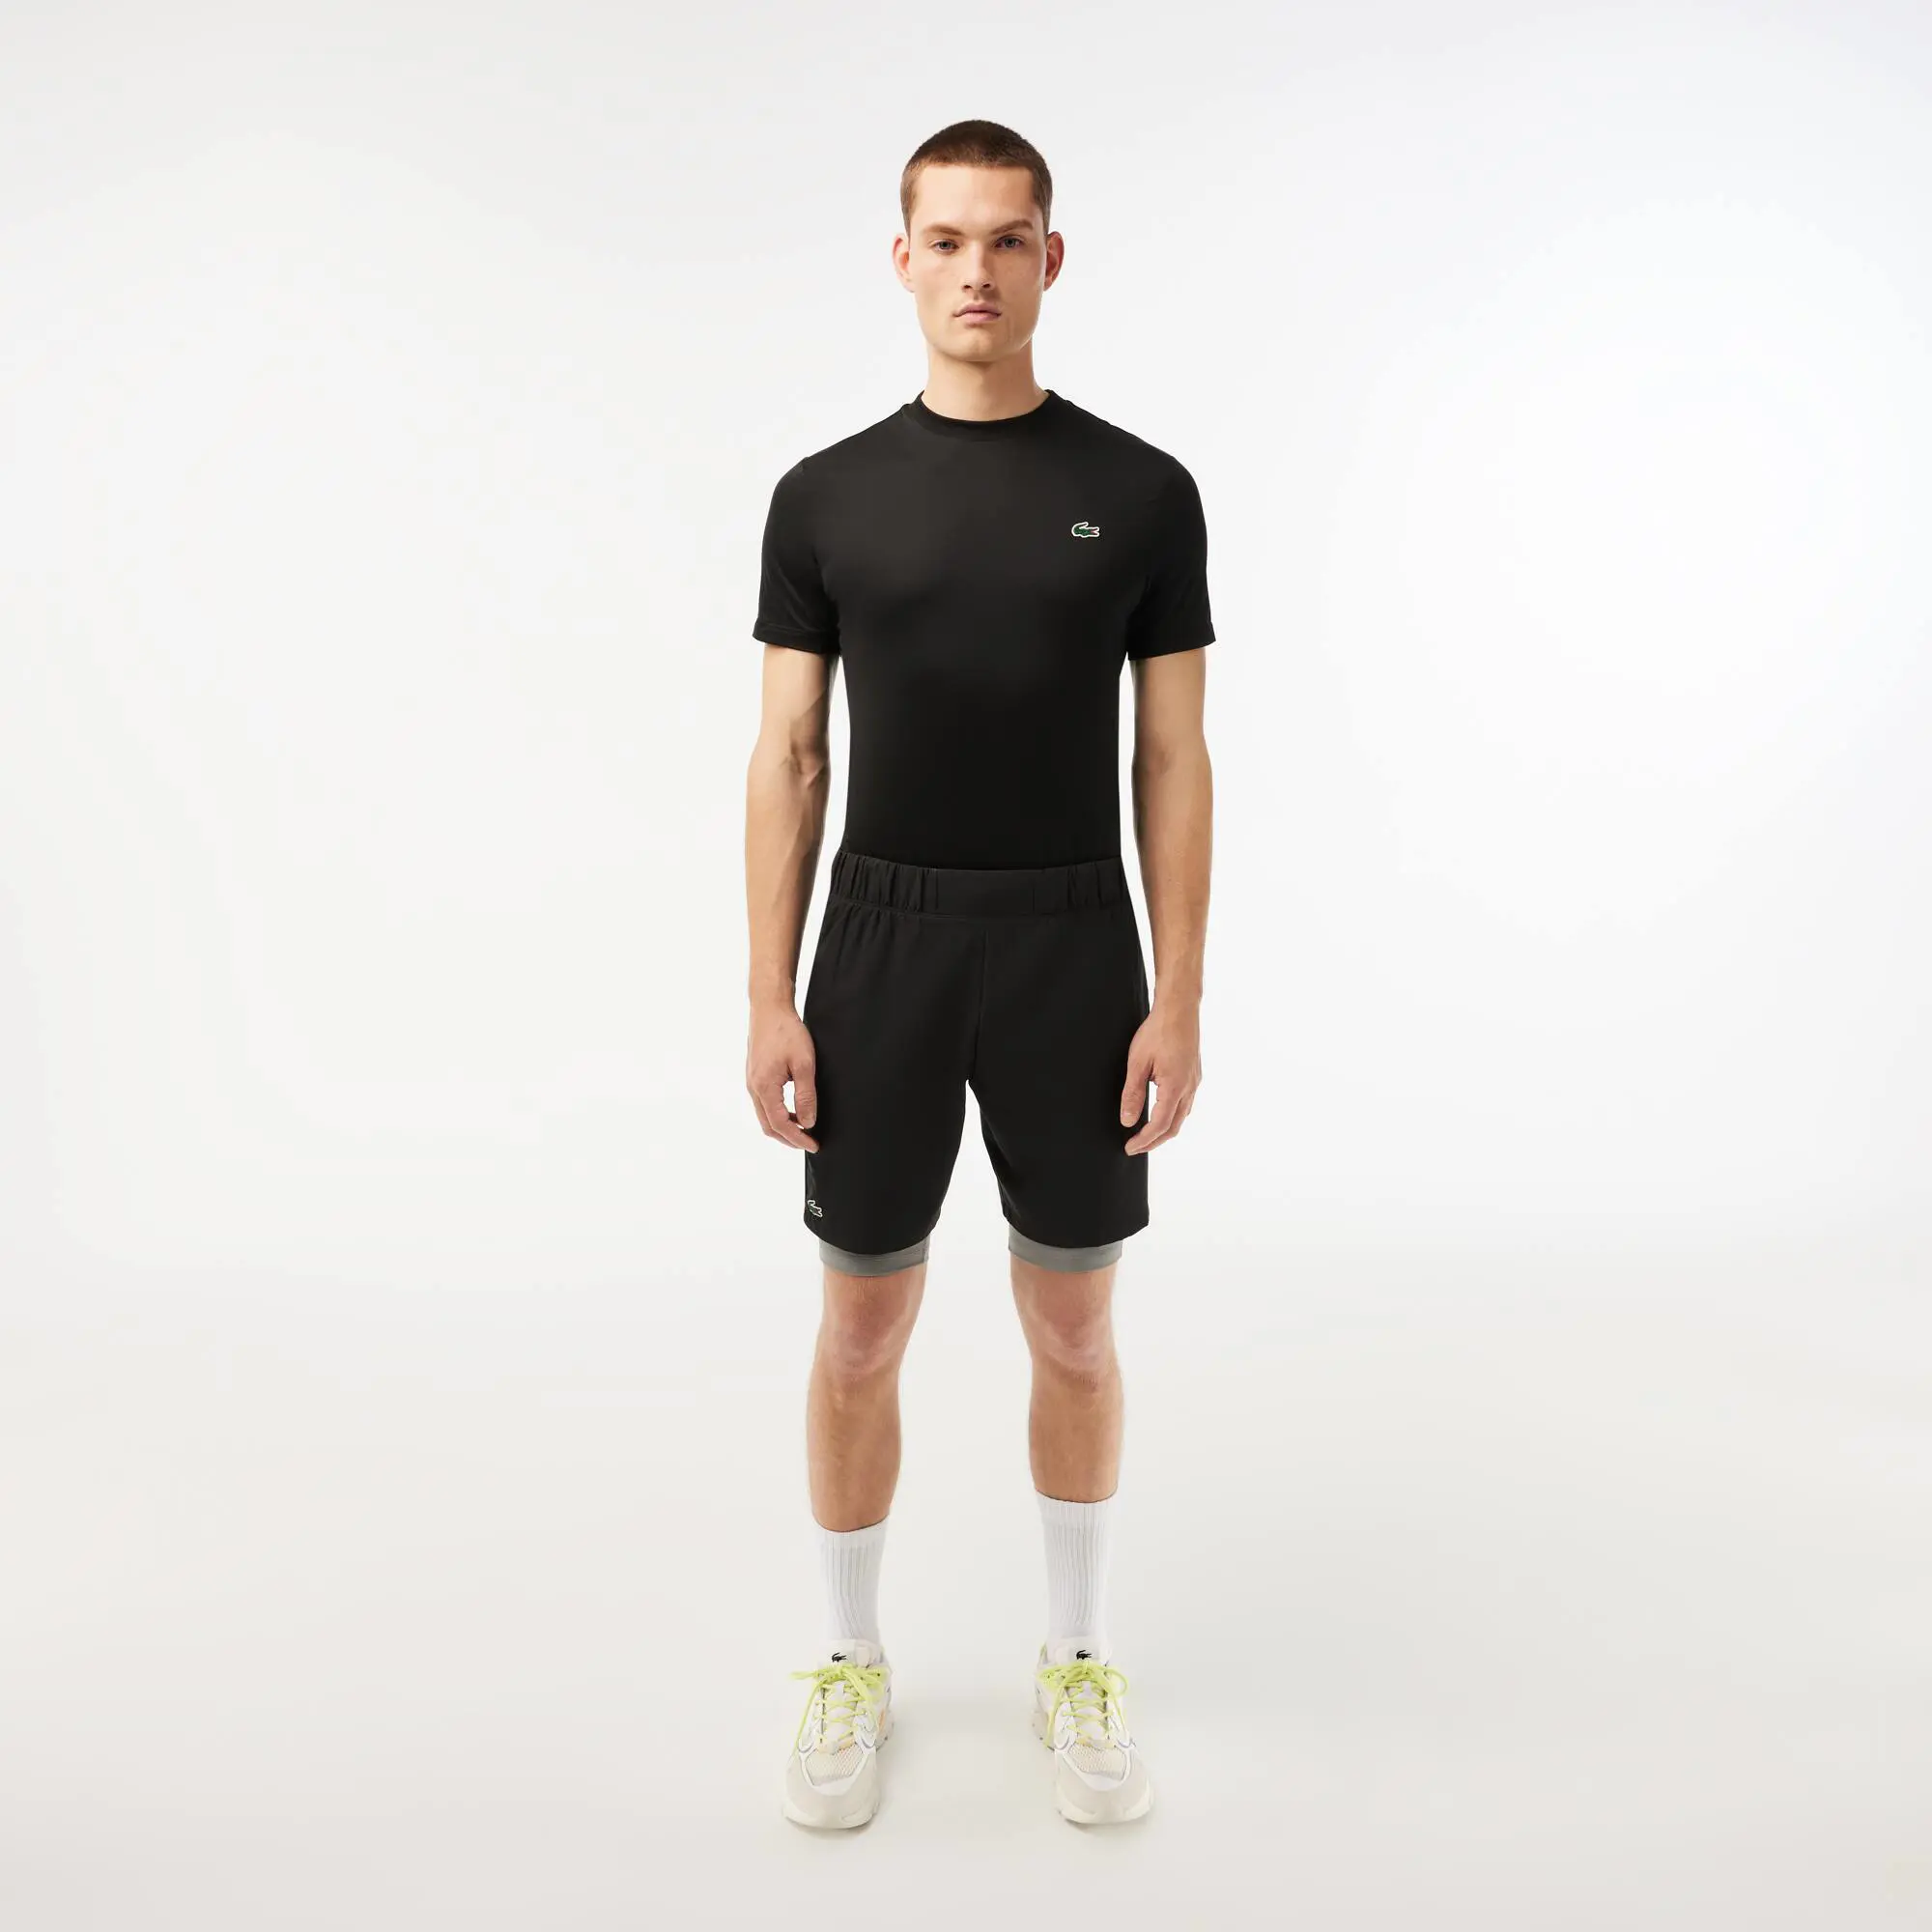 Lacoste Men’s Two-Tone Lacoste Sport Shorts with Built-in Undershorts. 1